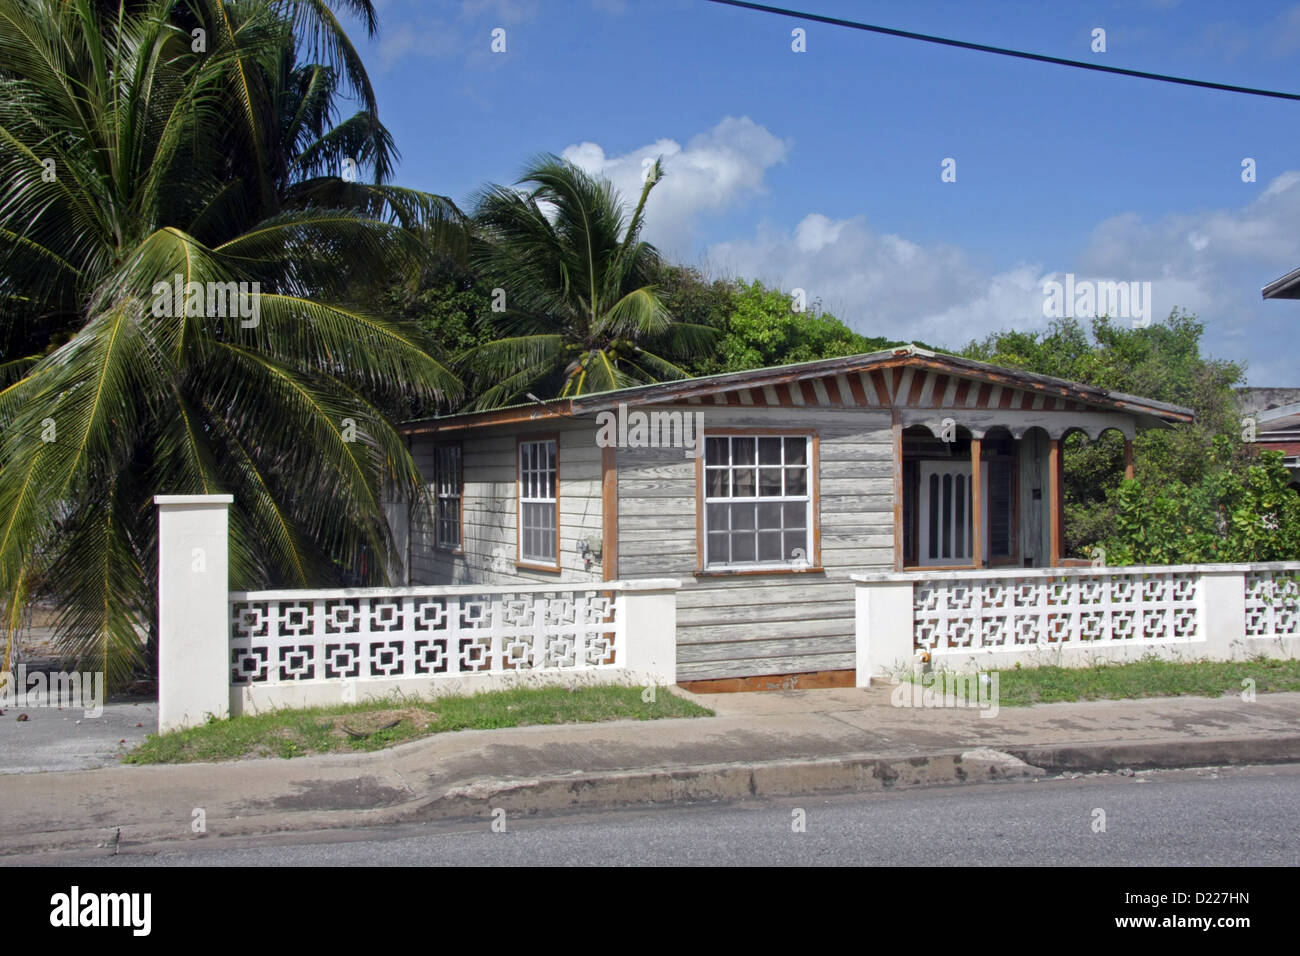 typical small simple house in Barbados Stock Photo